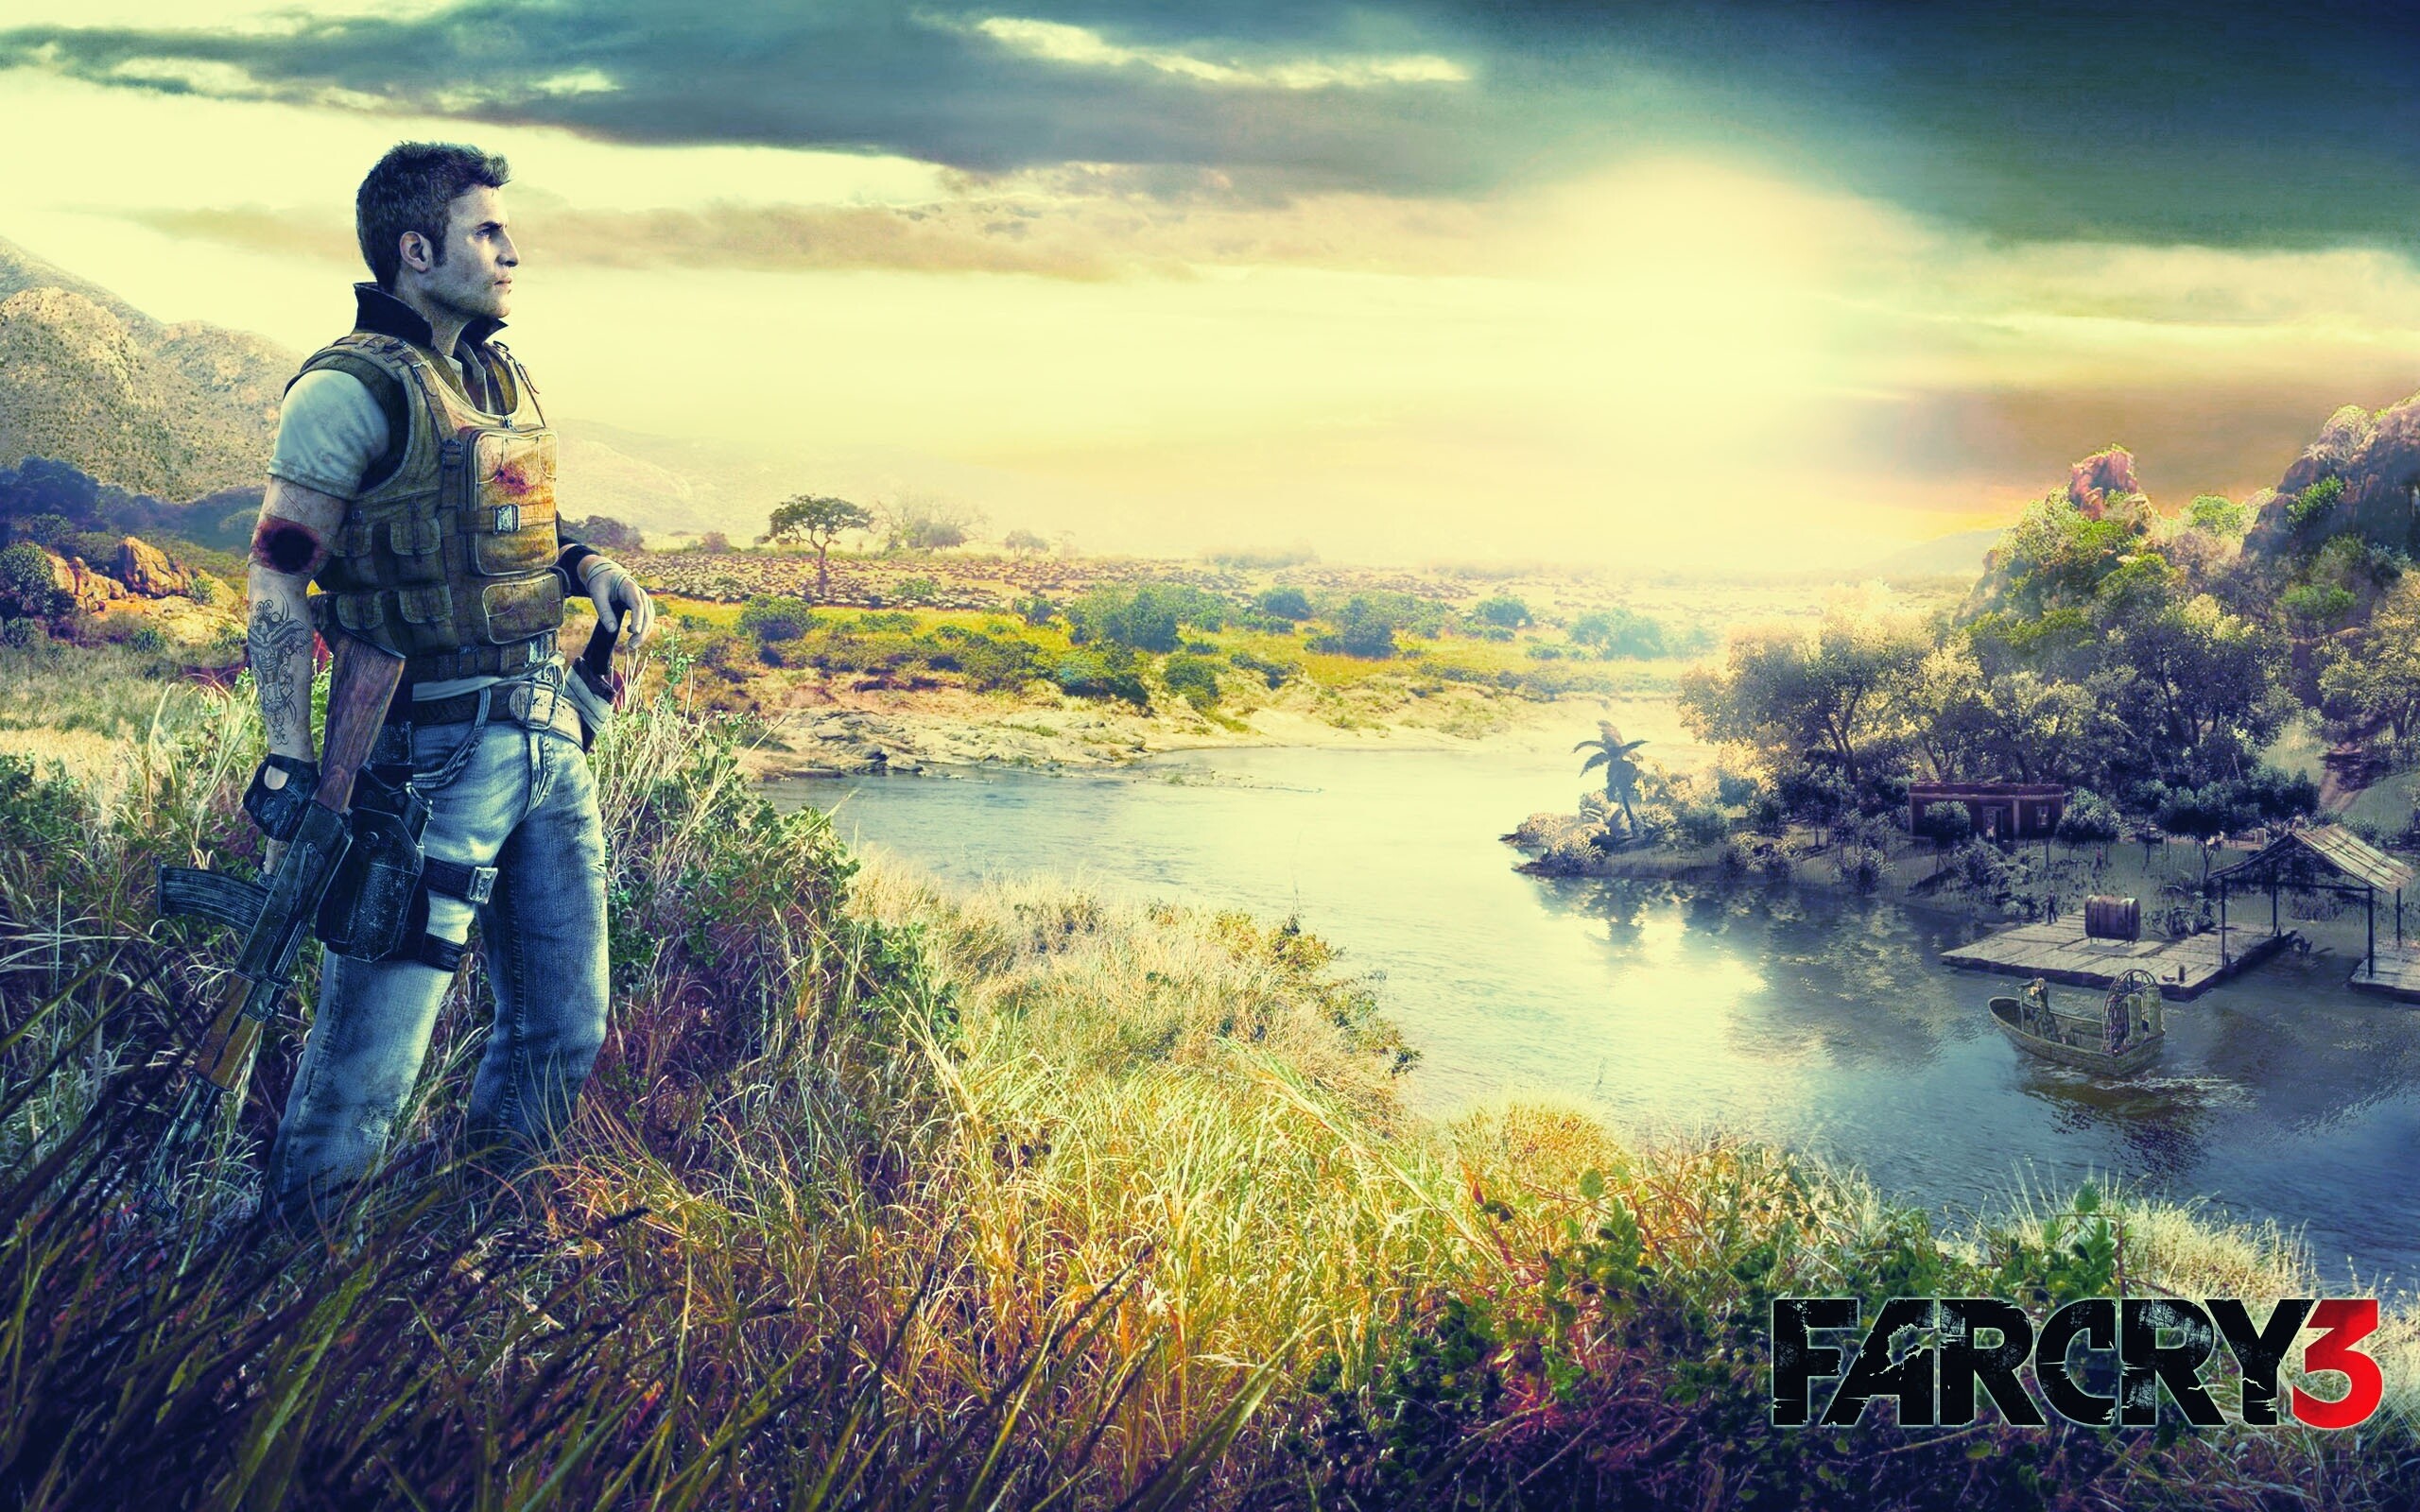 Far Cry 3: The 3rd Installment of the franchise developed by Ubisoft. 2560x1600 HD Background.